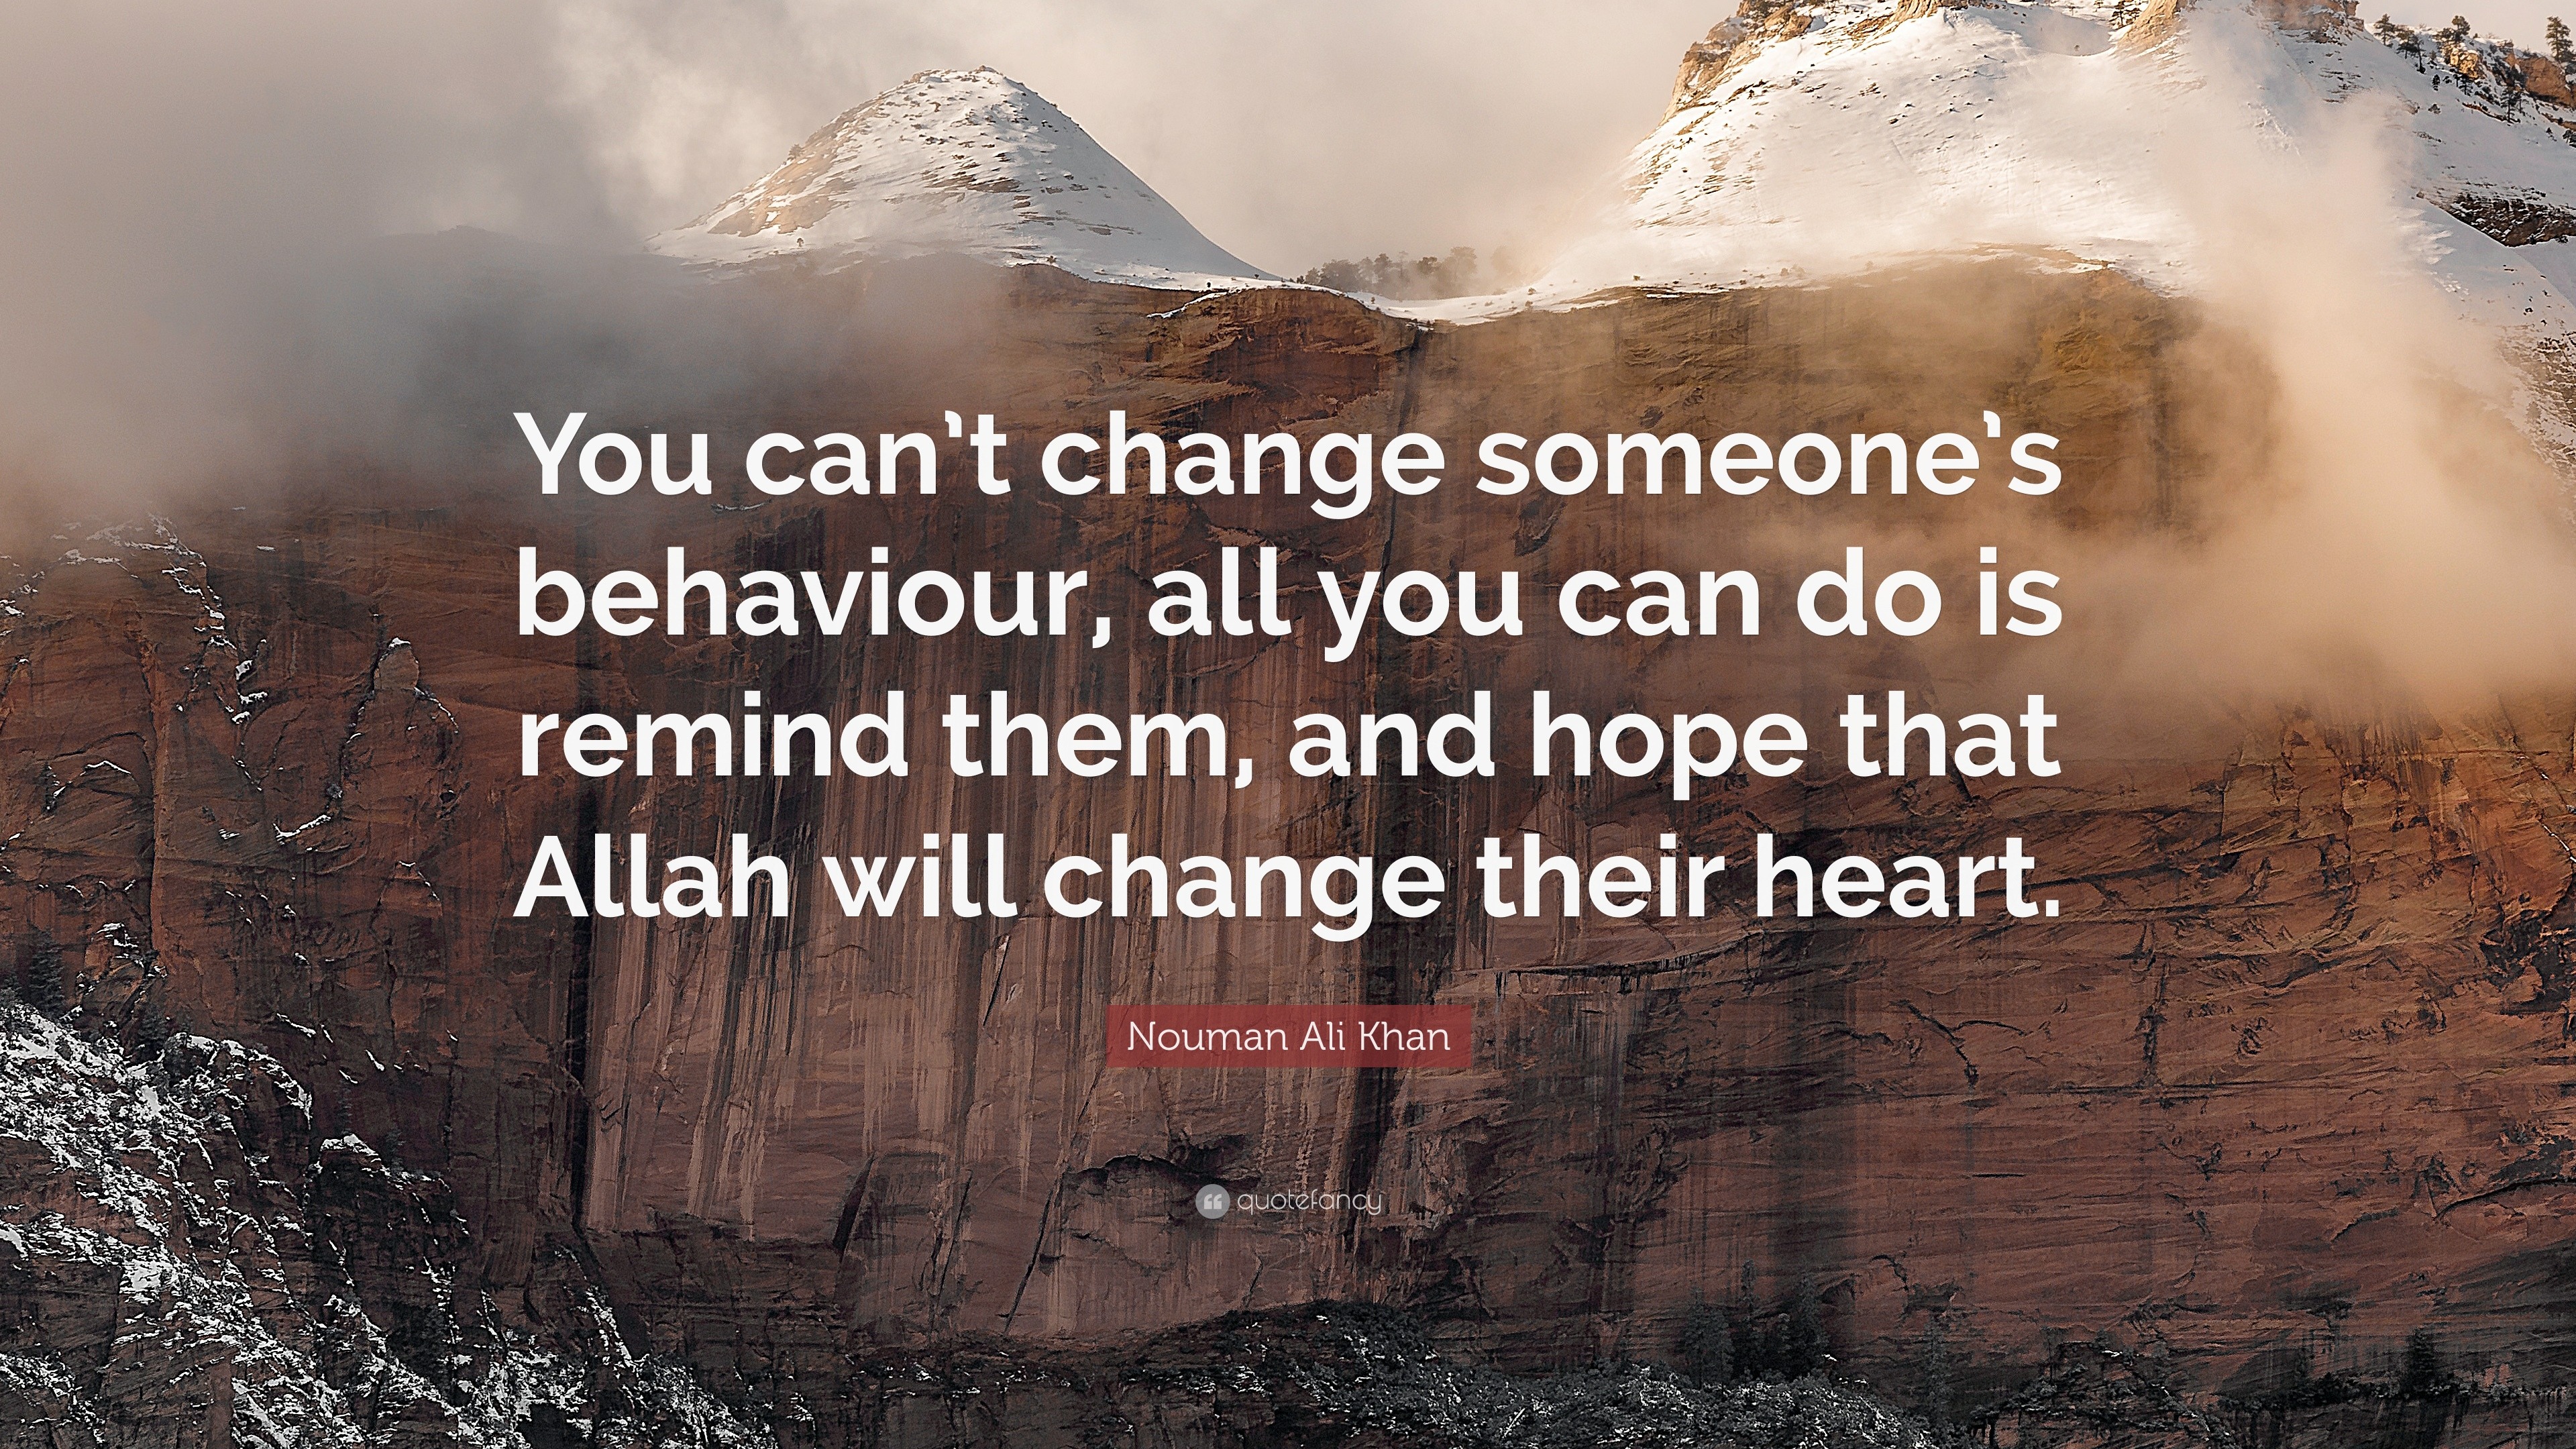 Nouman Ali Khan Quote “You can t change someone s behaviour all you